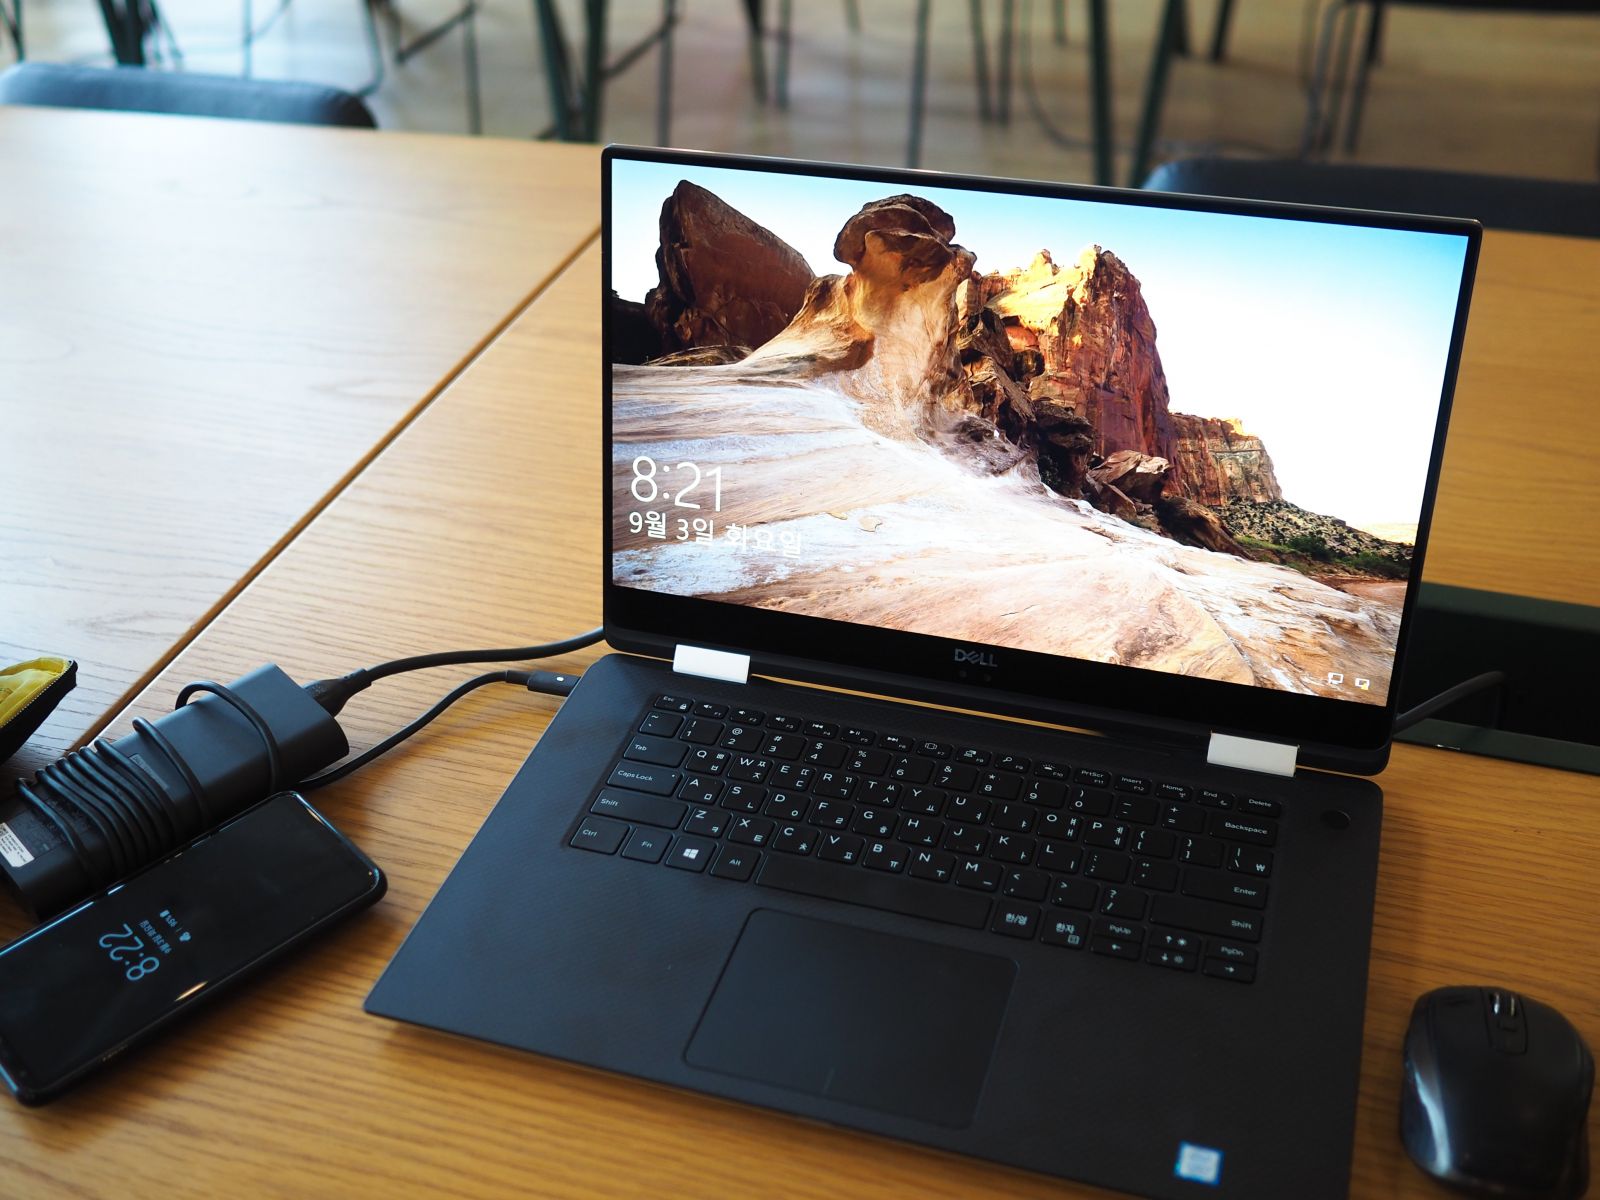 Check out ways to save on Dell's XPS laptop, gaming laptops, and other top products.